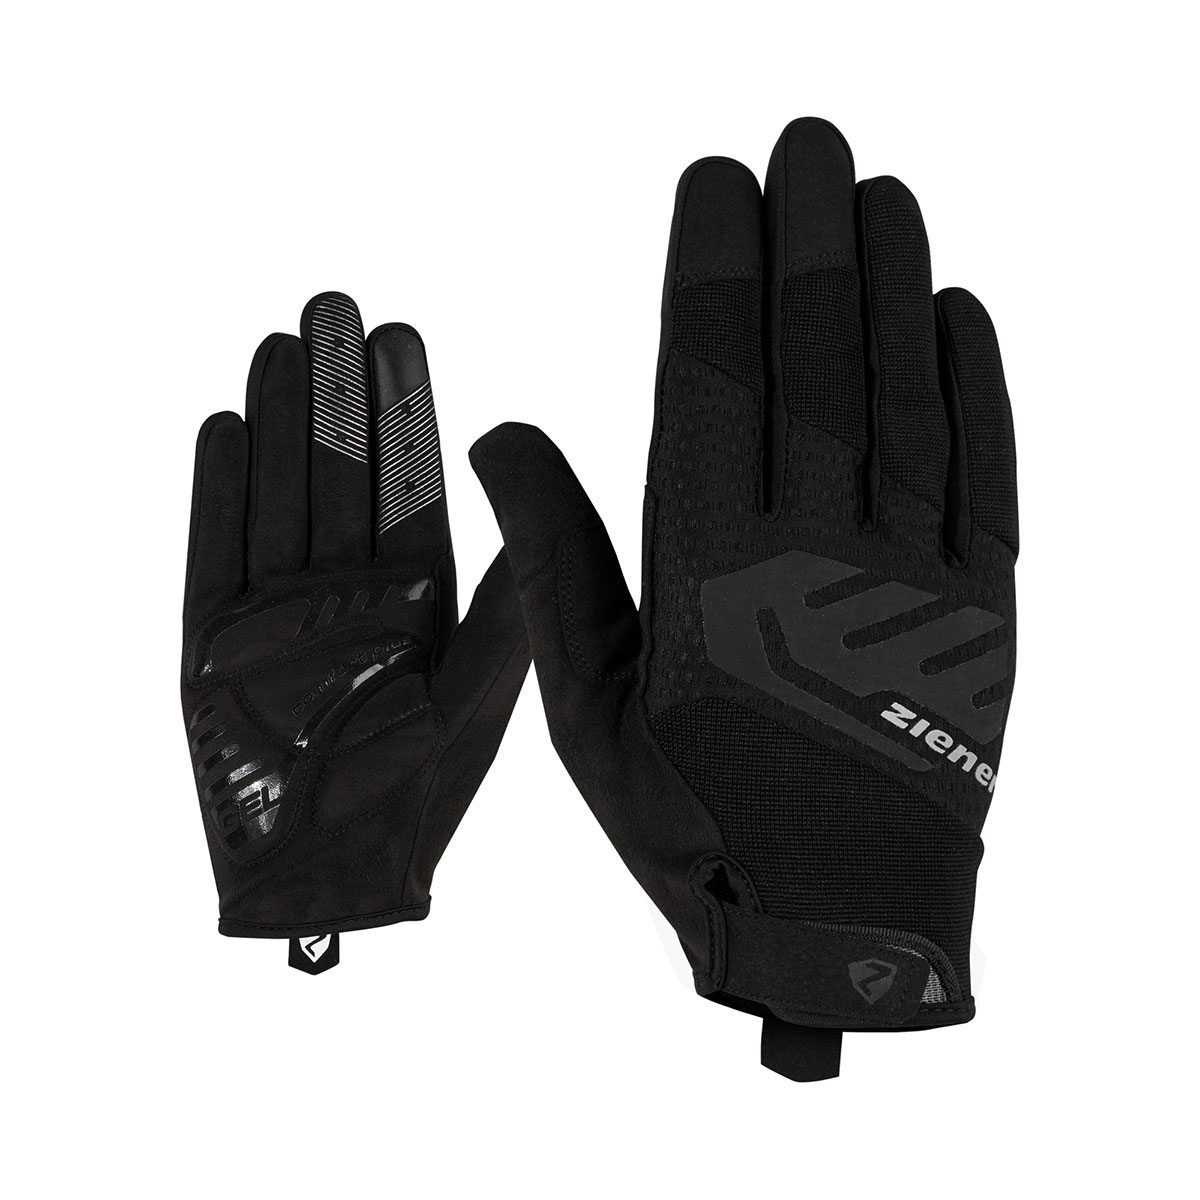 Ziener  CHED TOUCH long bike glove